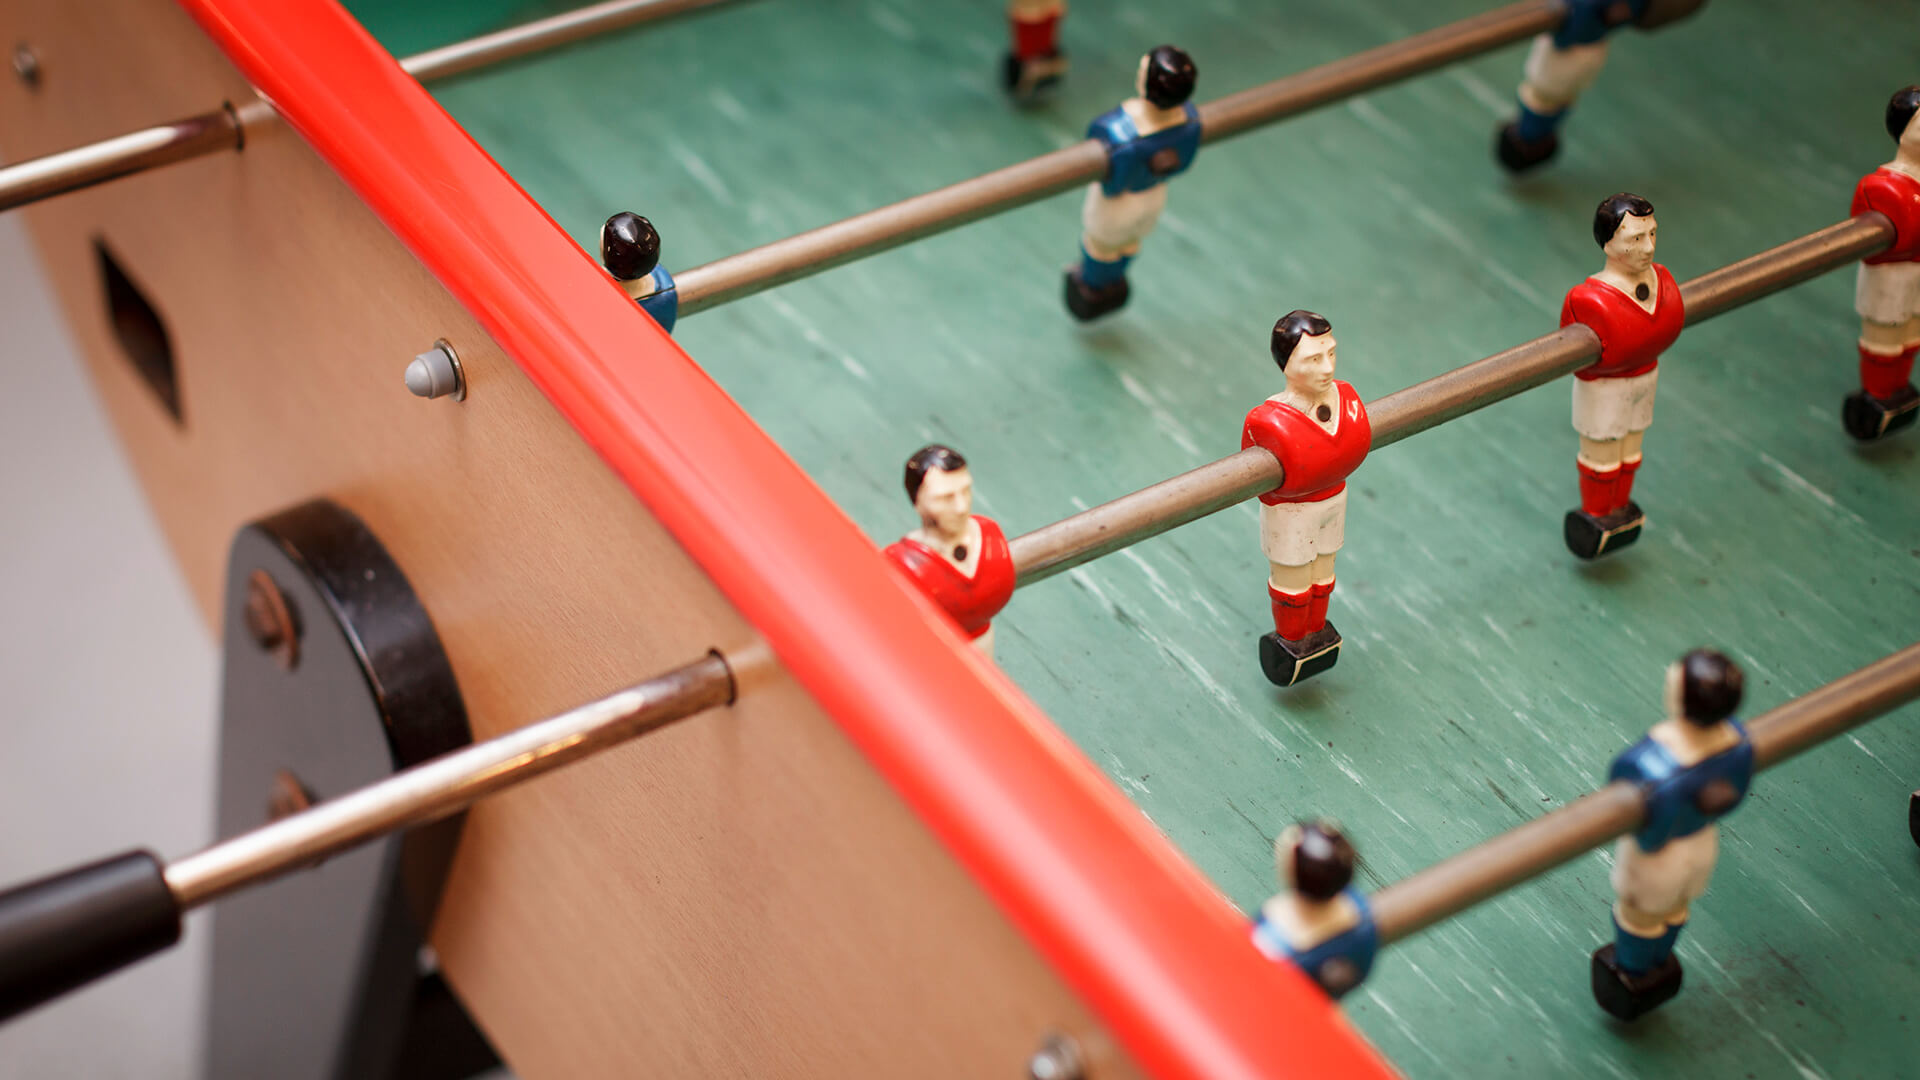 The 'Foosball' table for lunchtime recreation in the OneFiveSeven basement